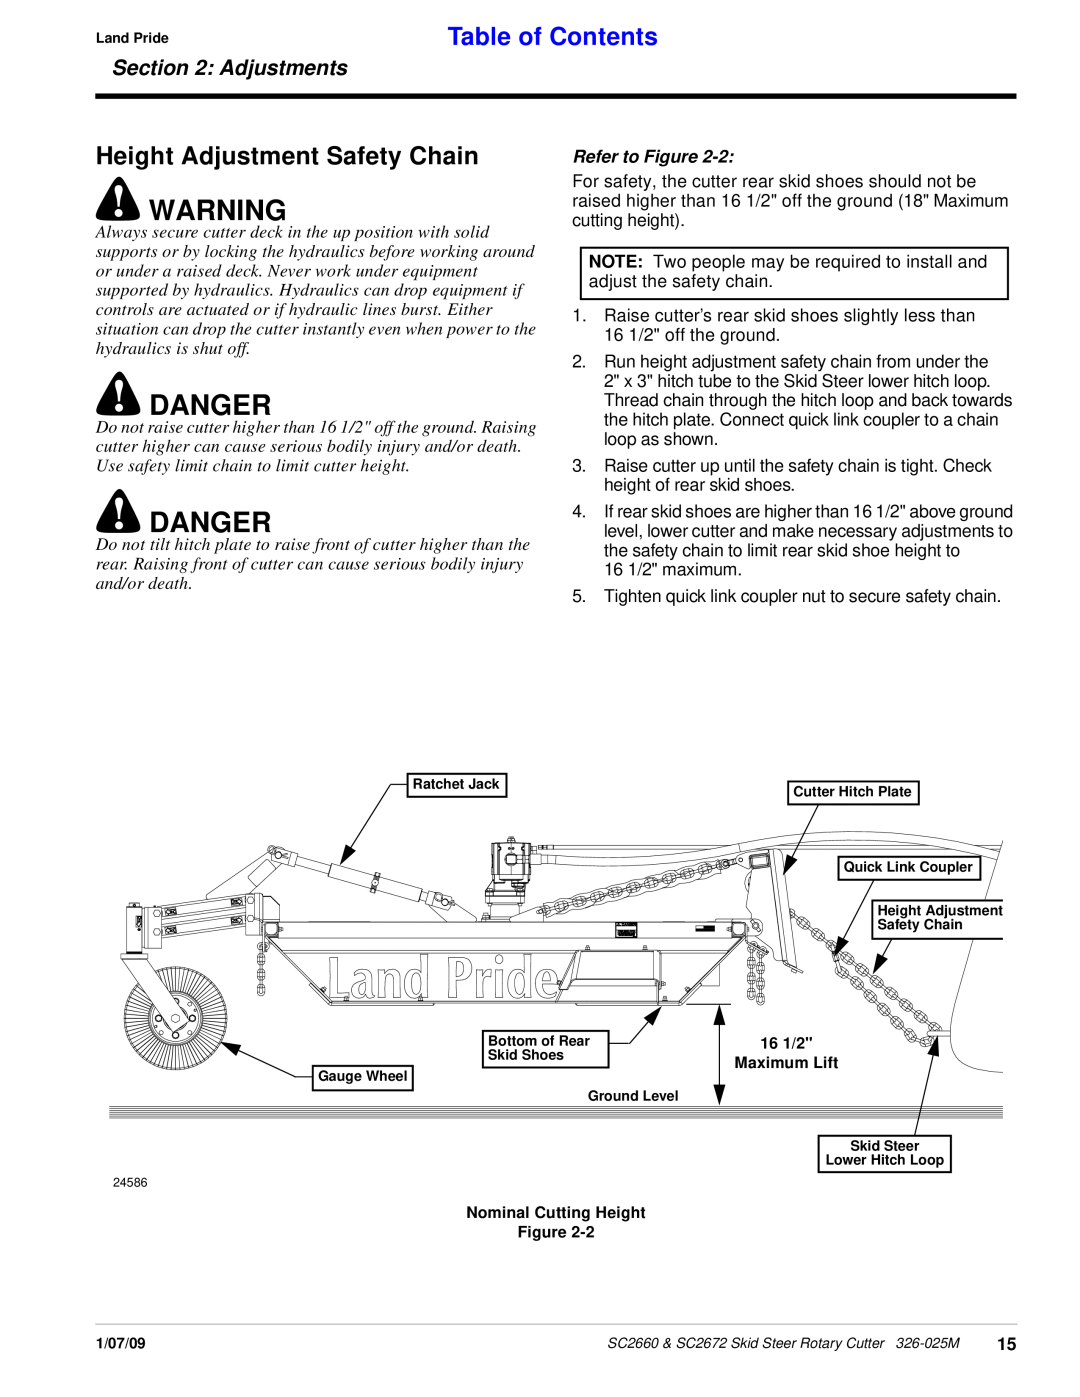 Land Pride SC2672, SC2660 manual Height Adjustment Safety Chain, Danger, Table of Contents, Adjustments, Refer to Figure 